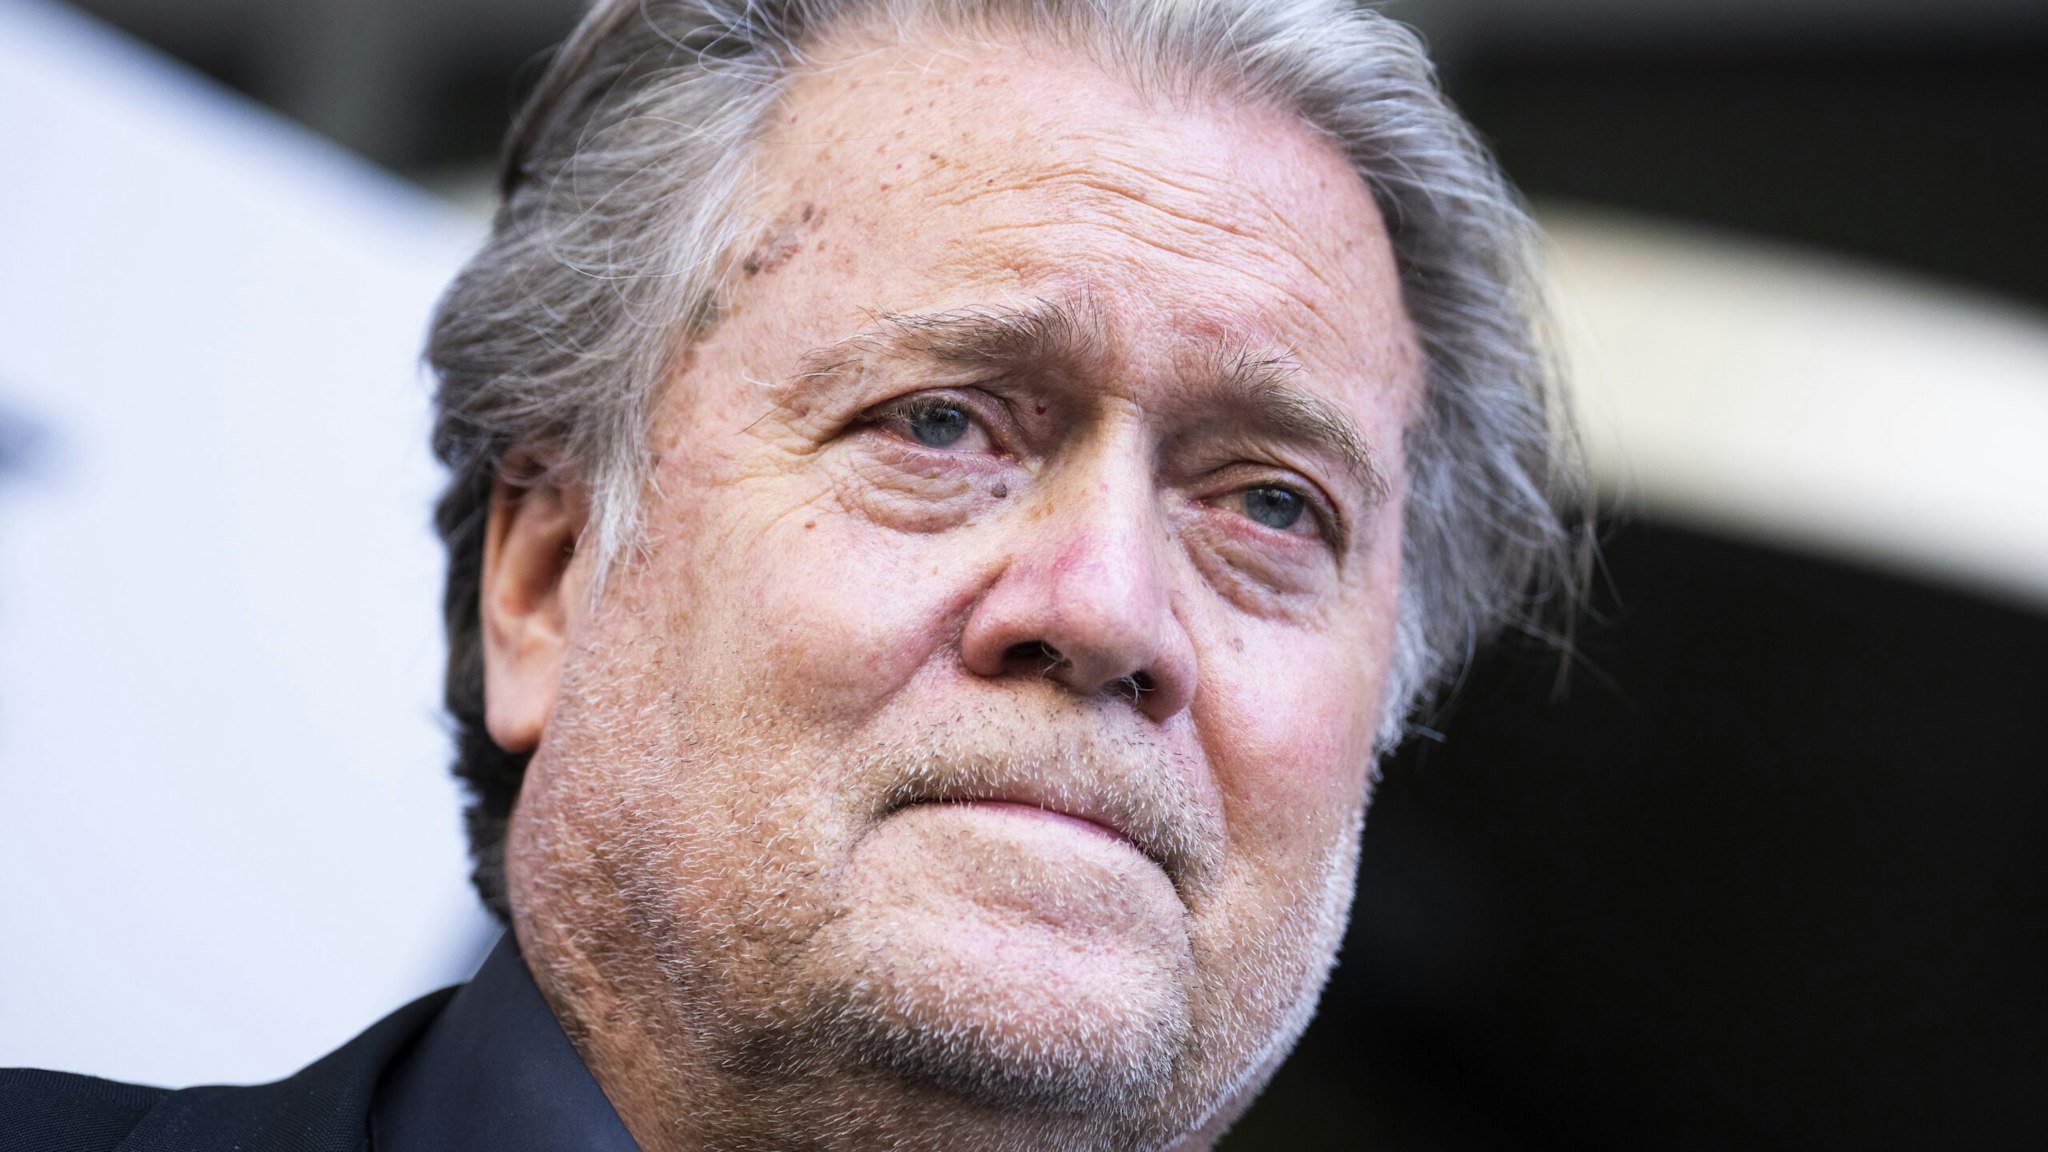 UNITED STATES - JULY 22: Steve Bannon is seen after being found guilty on contempt of Congress outside the E. Barrett Prettyman Courthouse on Friday, July 22, 2022.